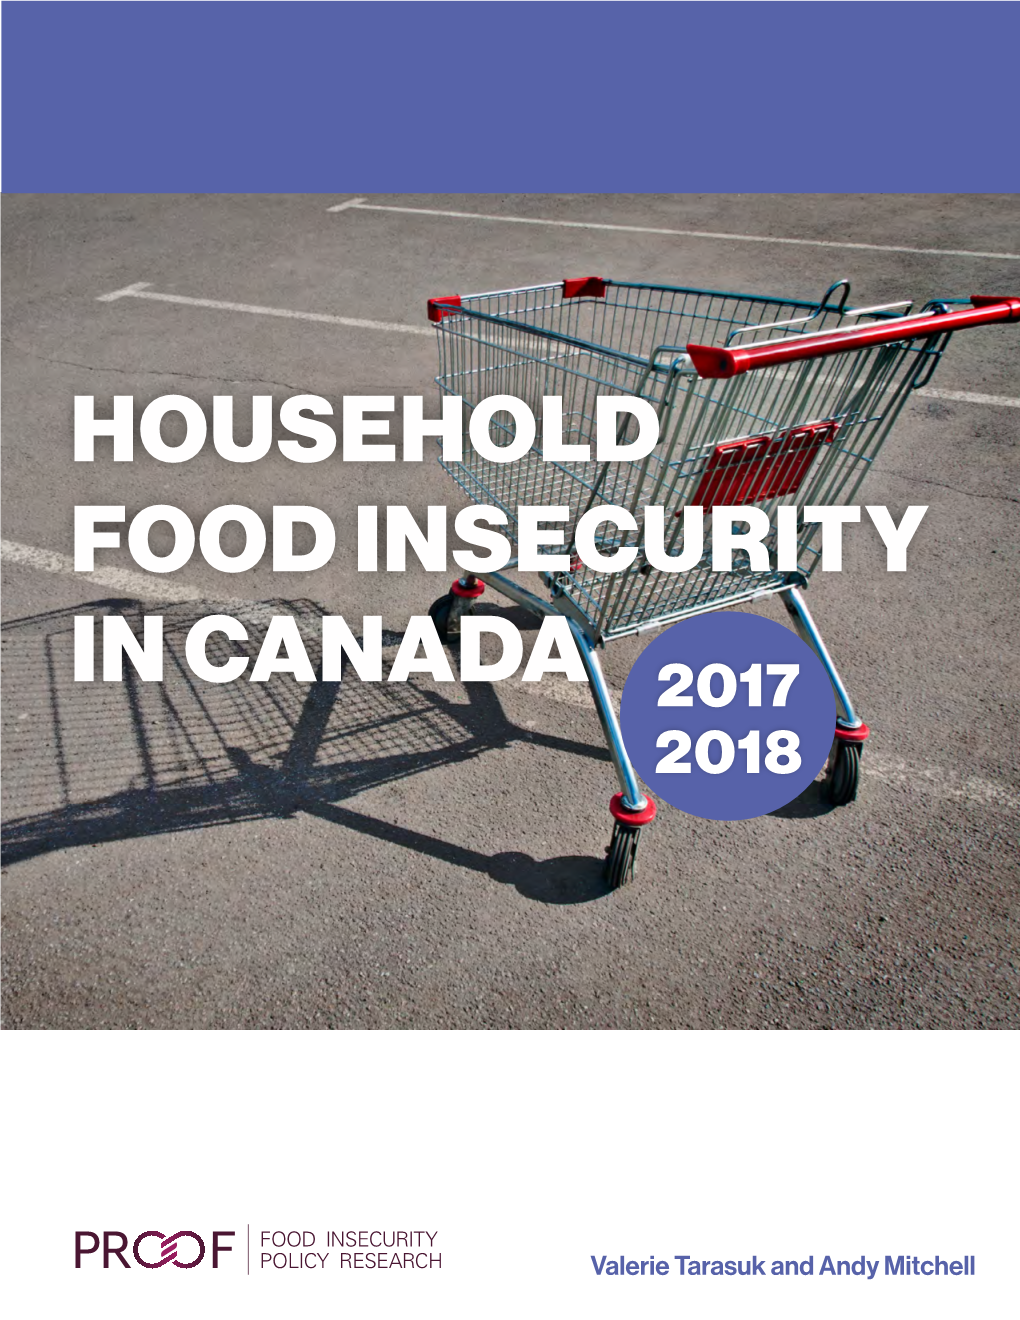 Household Food Insecurity in Canada 2017/2018 PROOF